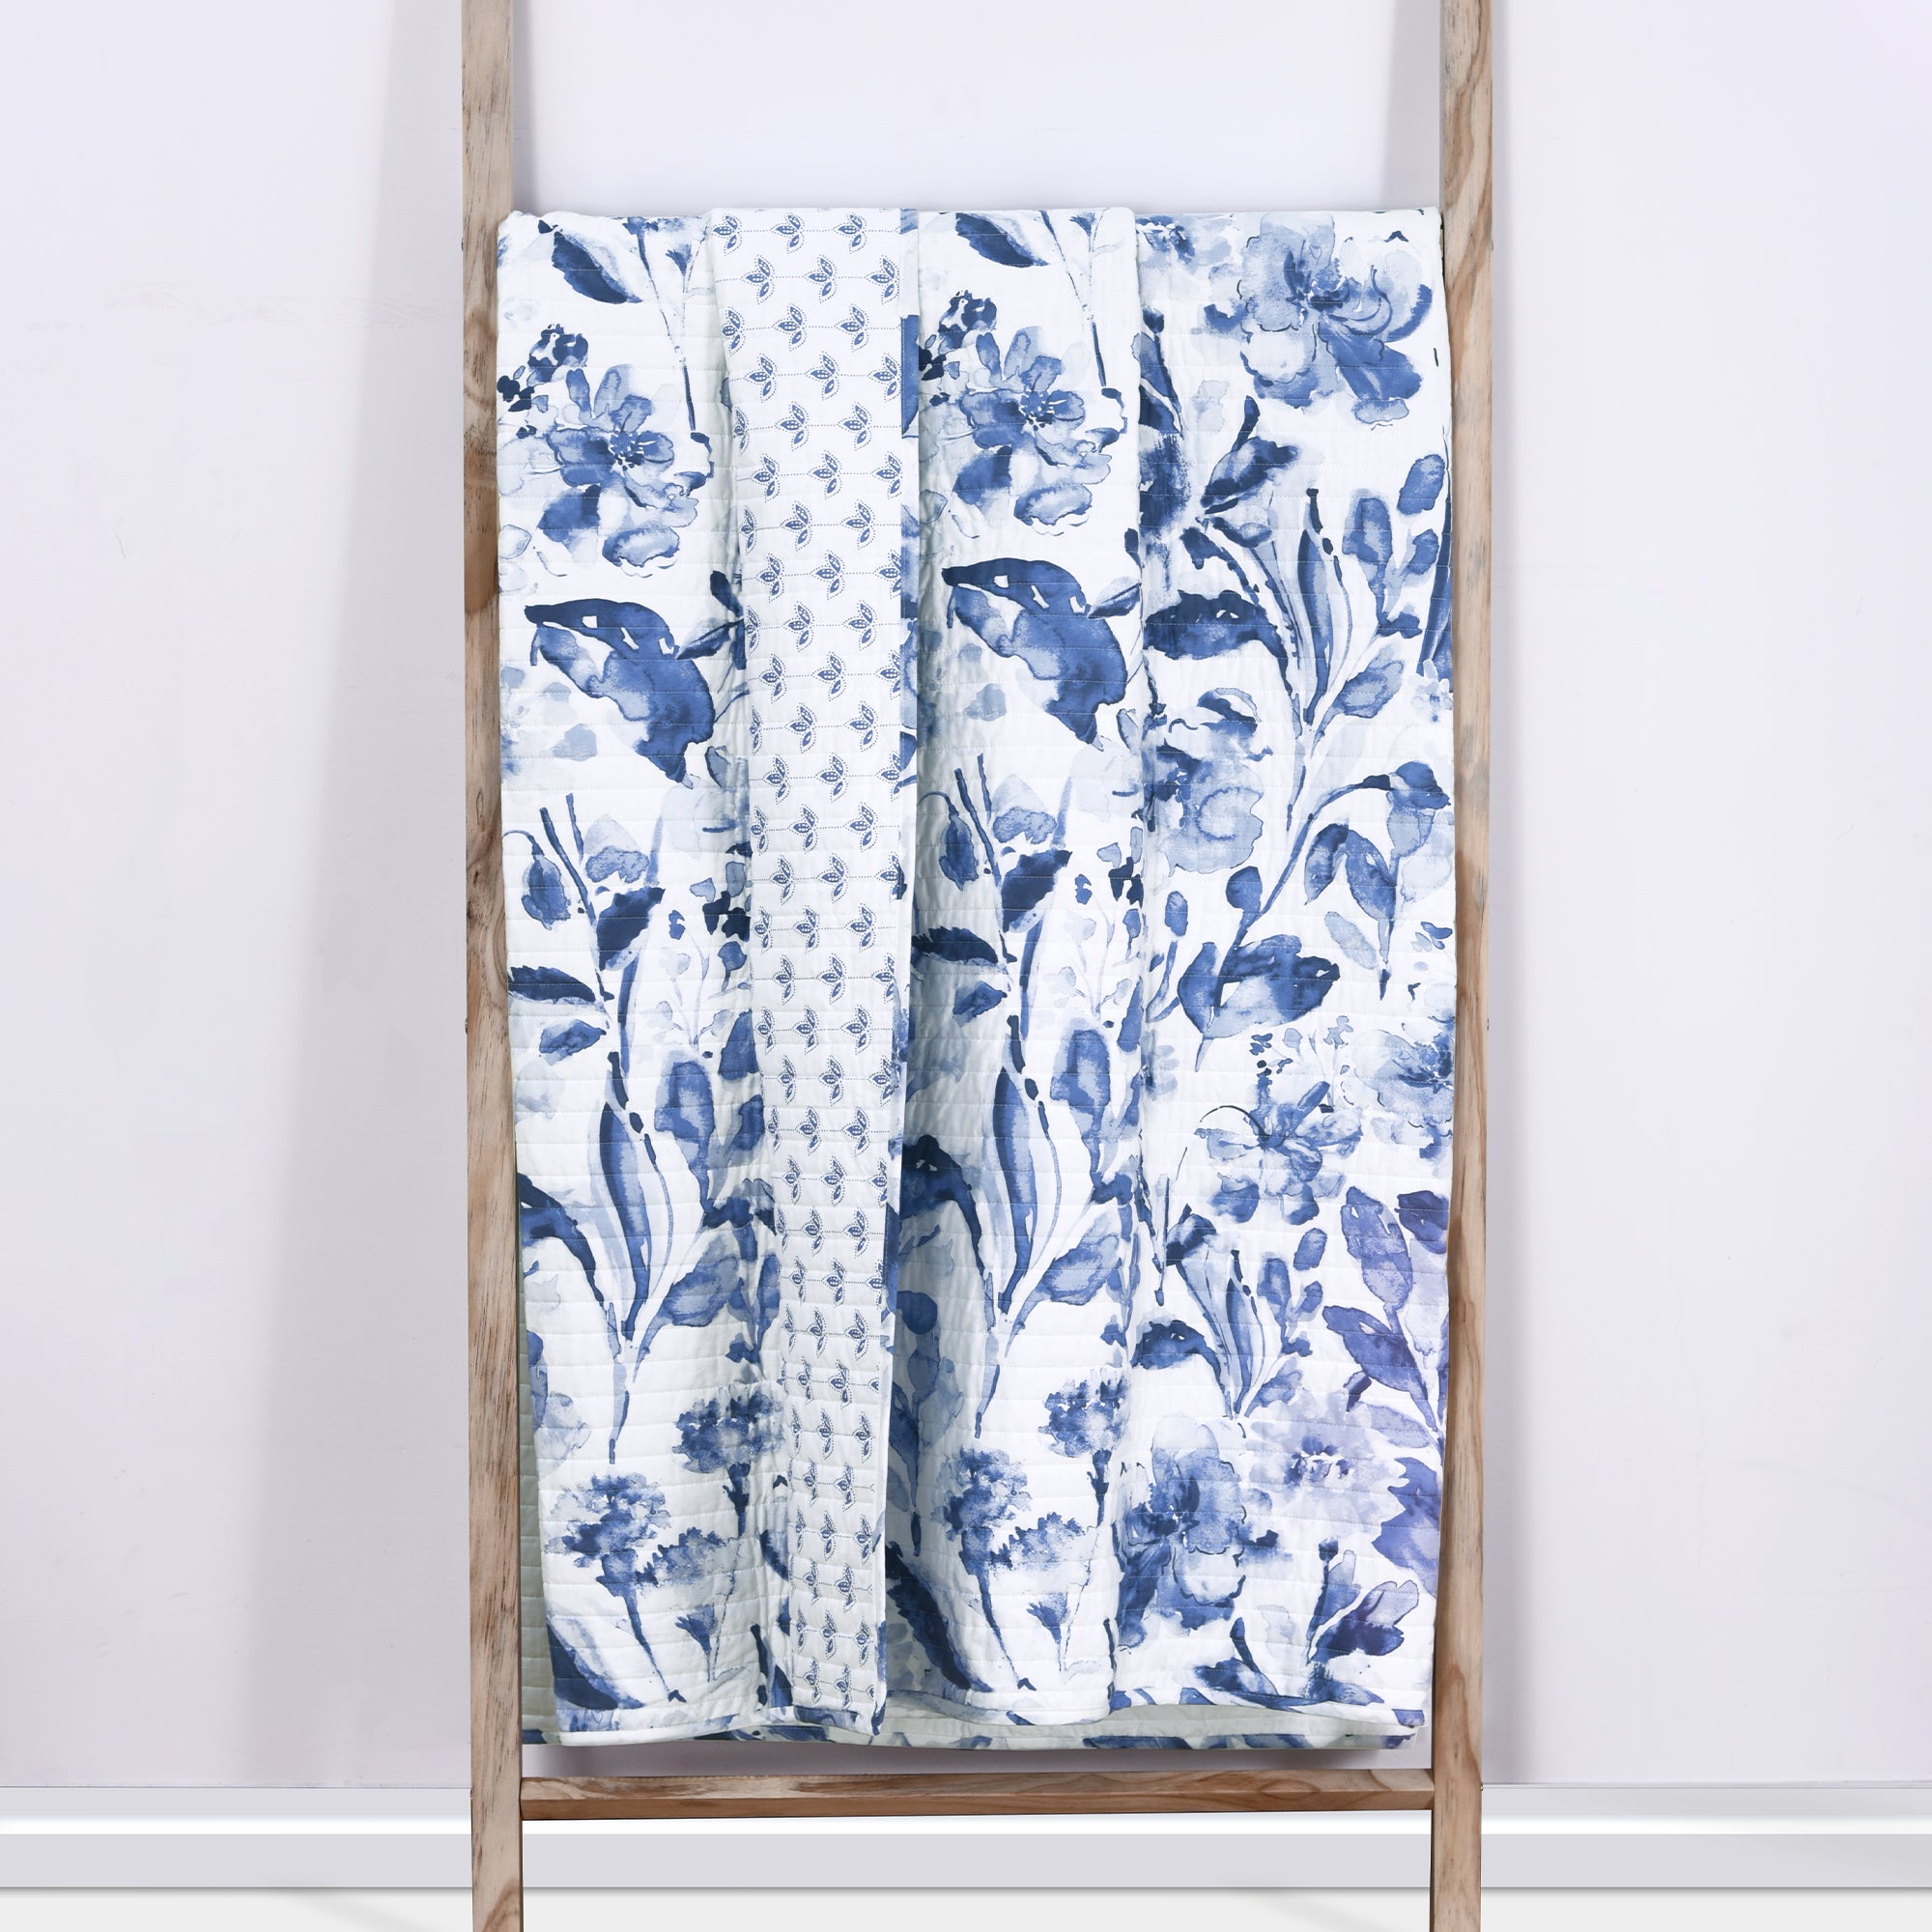 Linnea Blue Quilted Throw